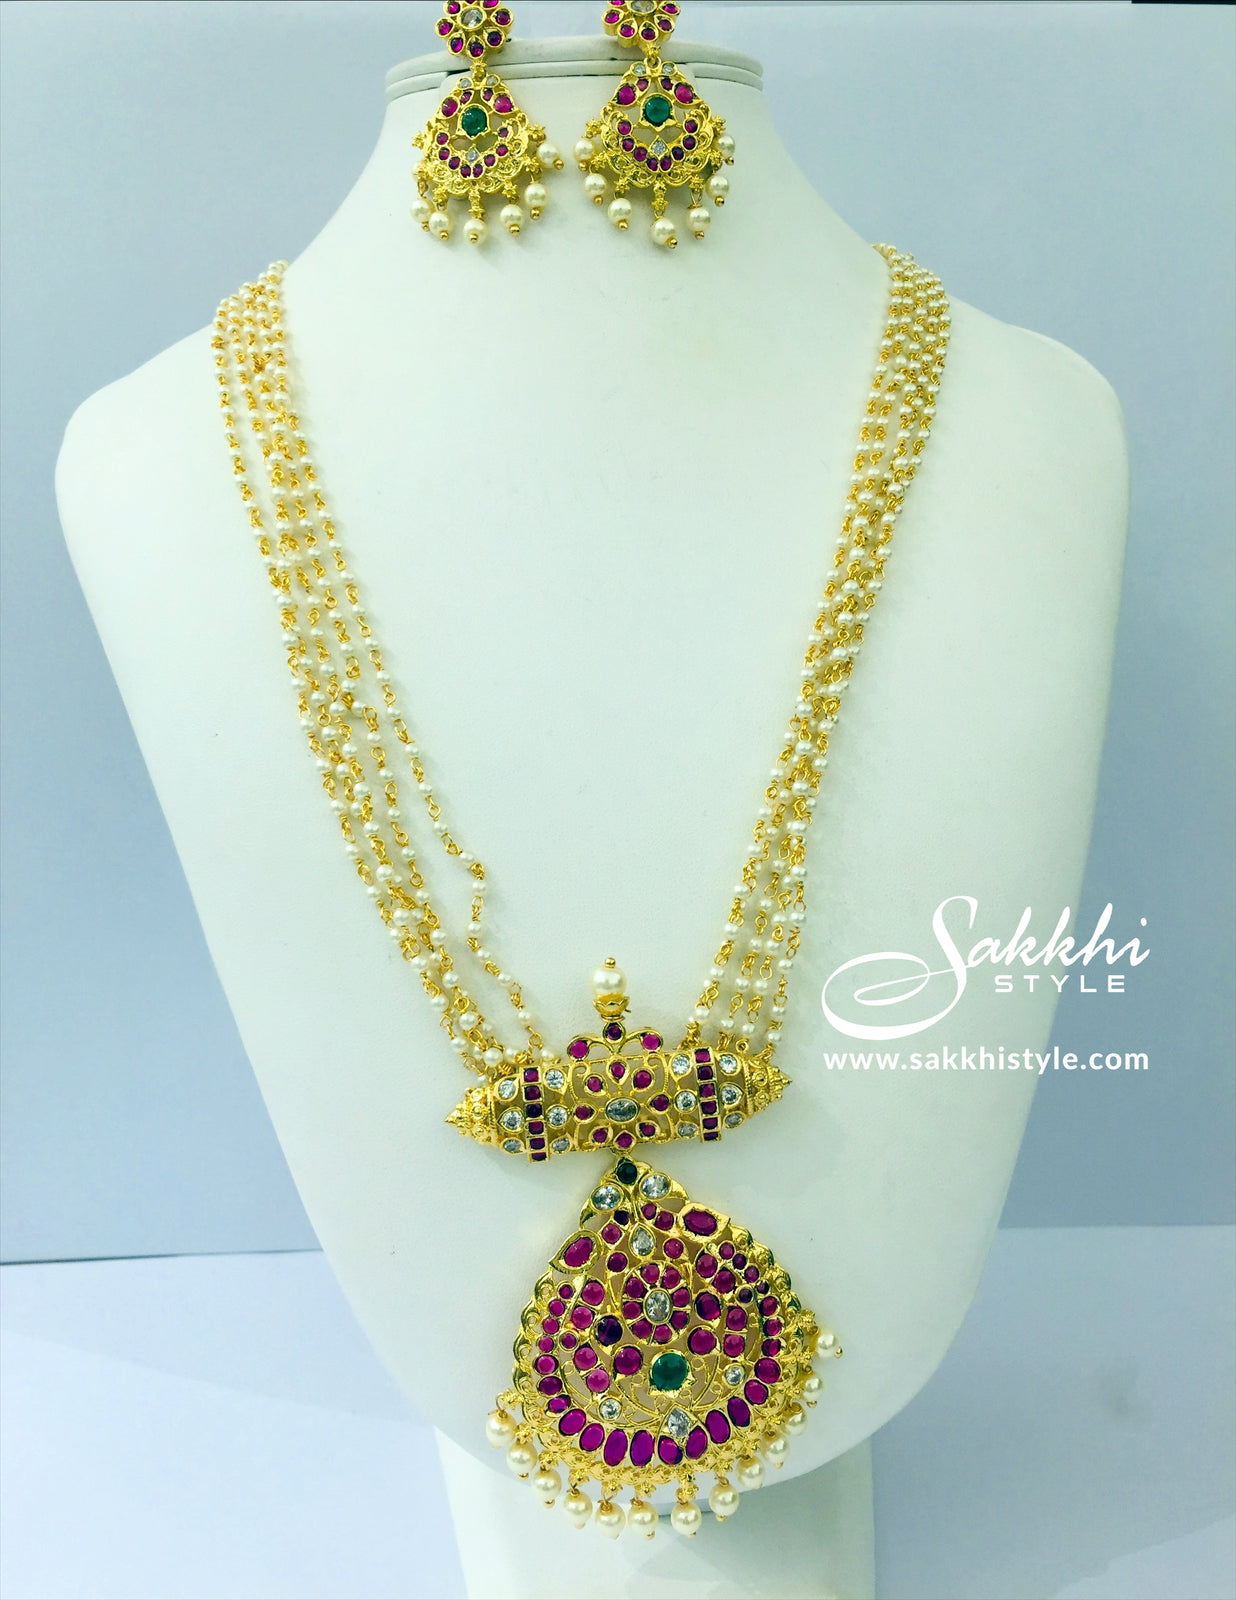 Pearl Beads Long Necklace - Sakkhi Style